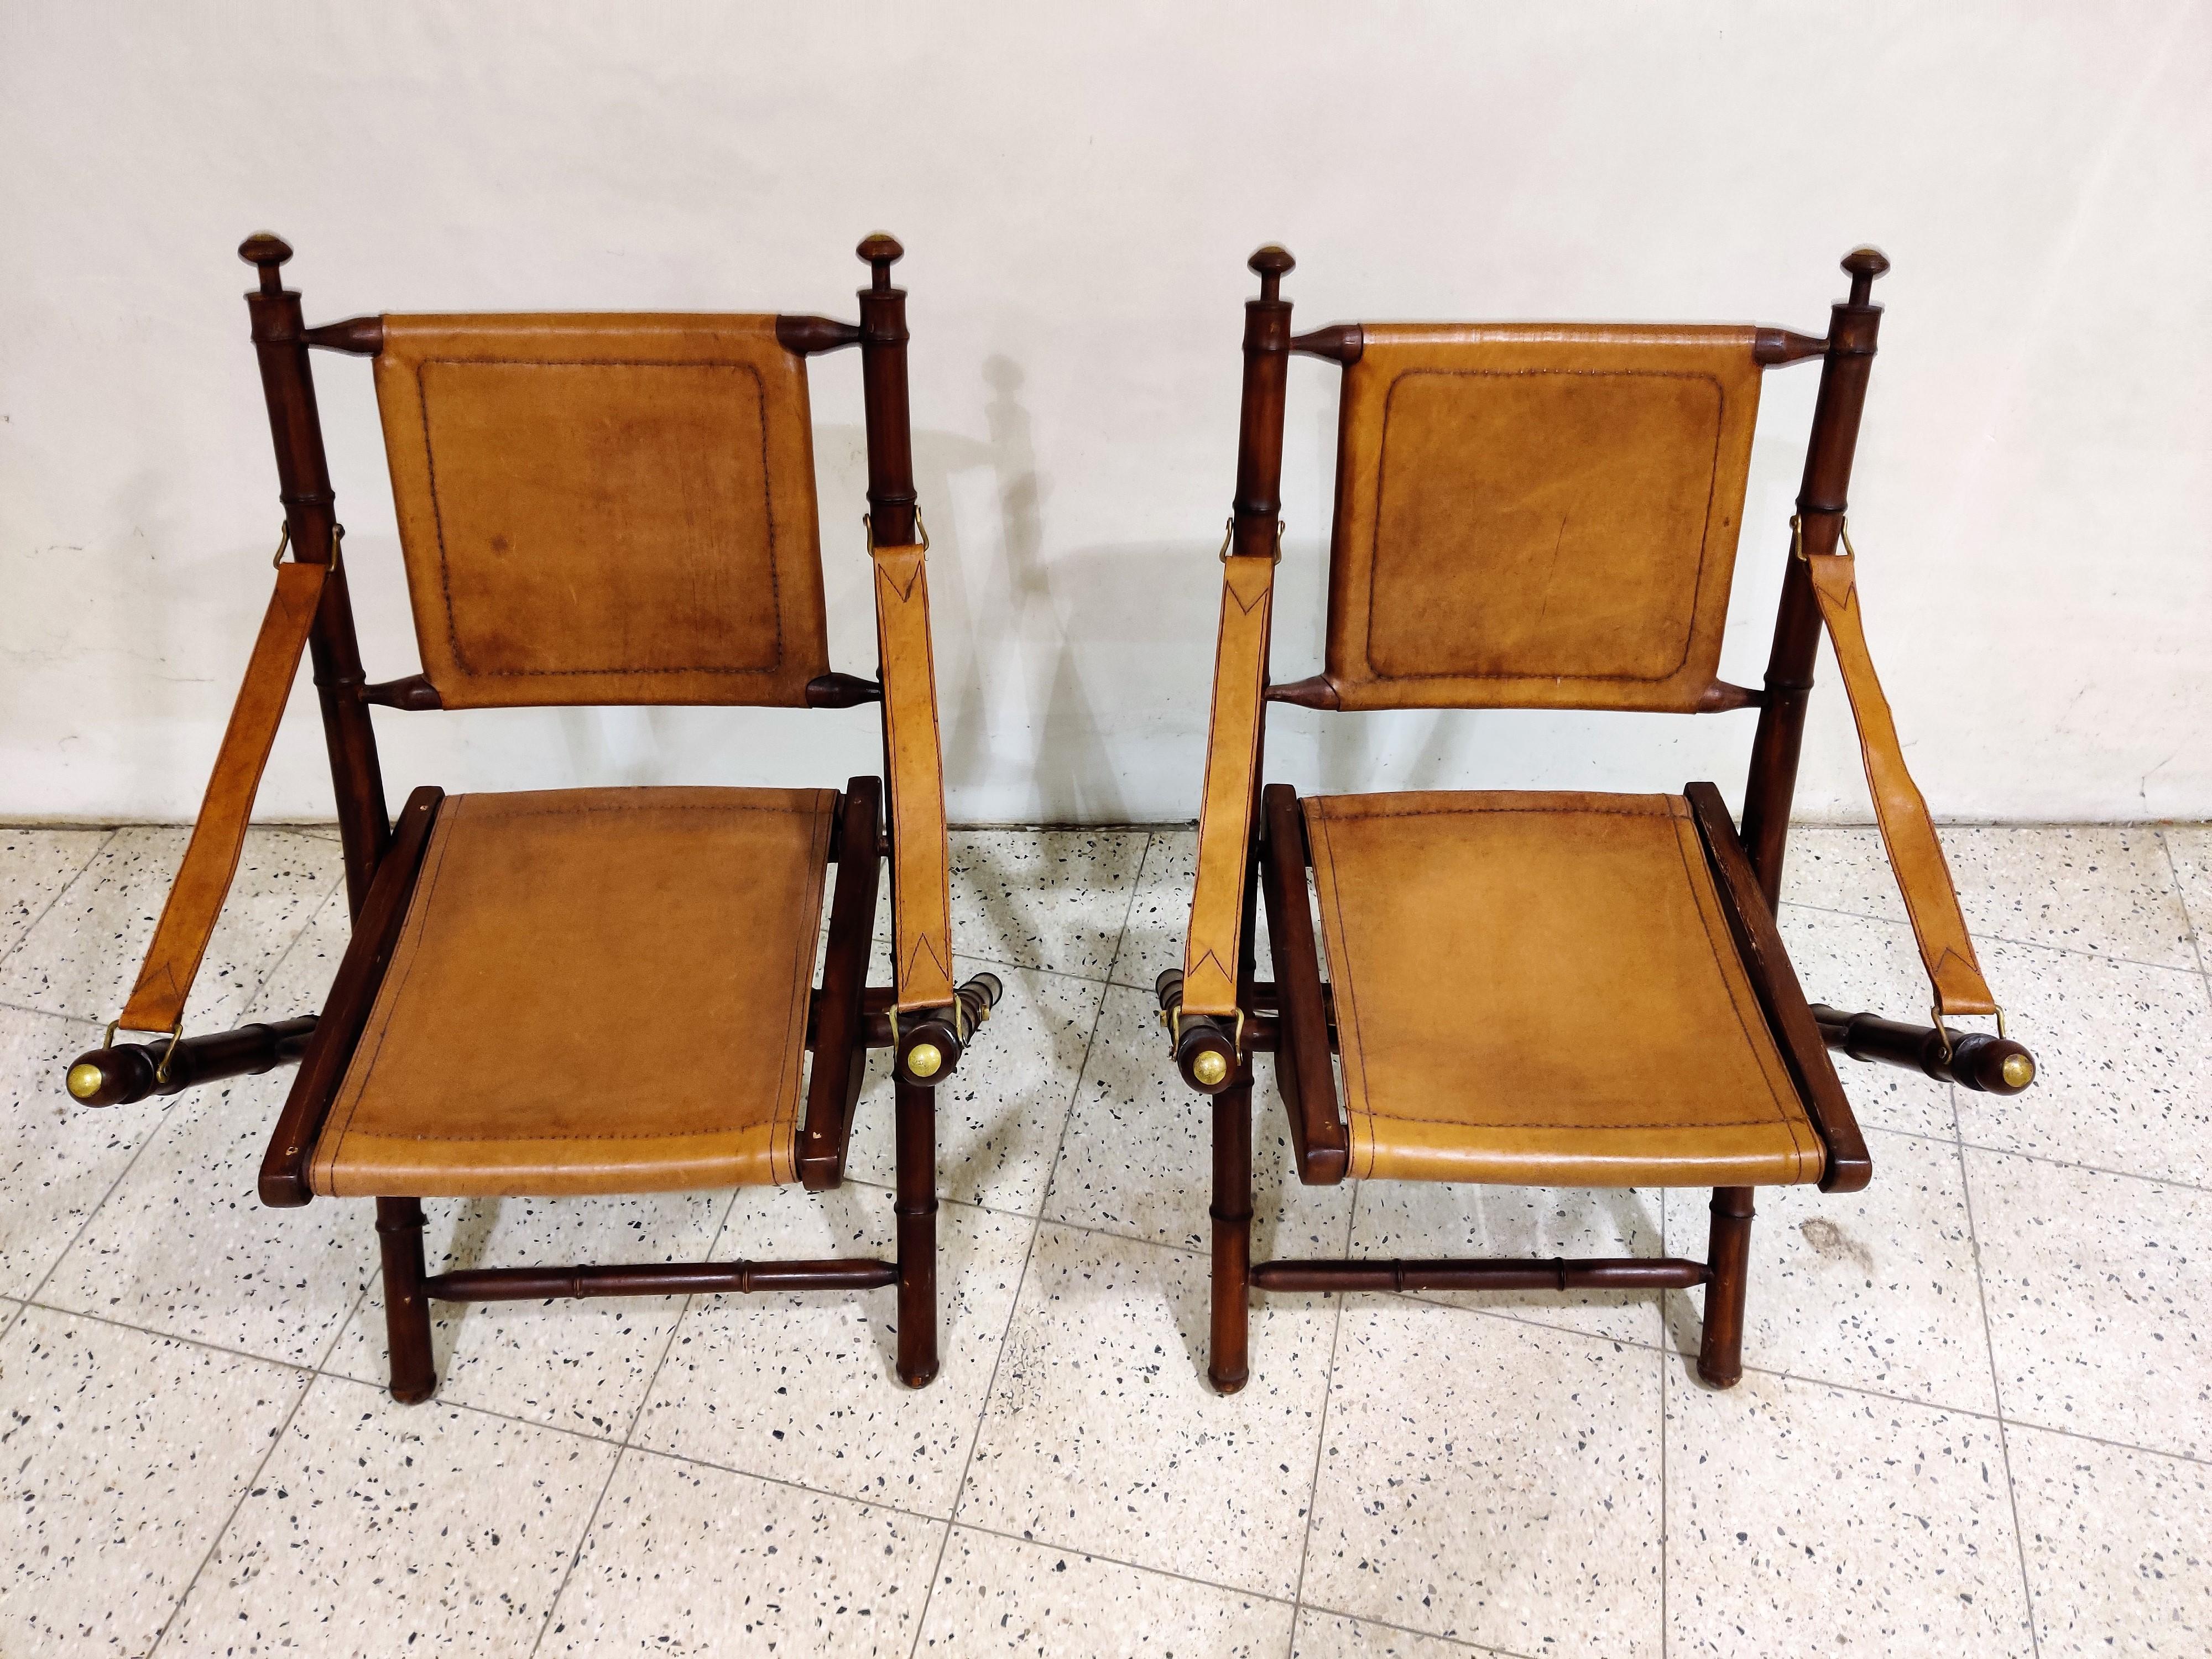 Pair of charming foldable leather military campaing chairs.

Sometimes also referred to as safari chairs.

They have a beautiful look, manufactured from camel coloured leather and rosewood with brass accents.

Good condition, with beautiful